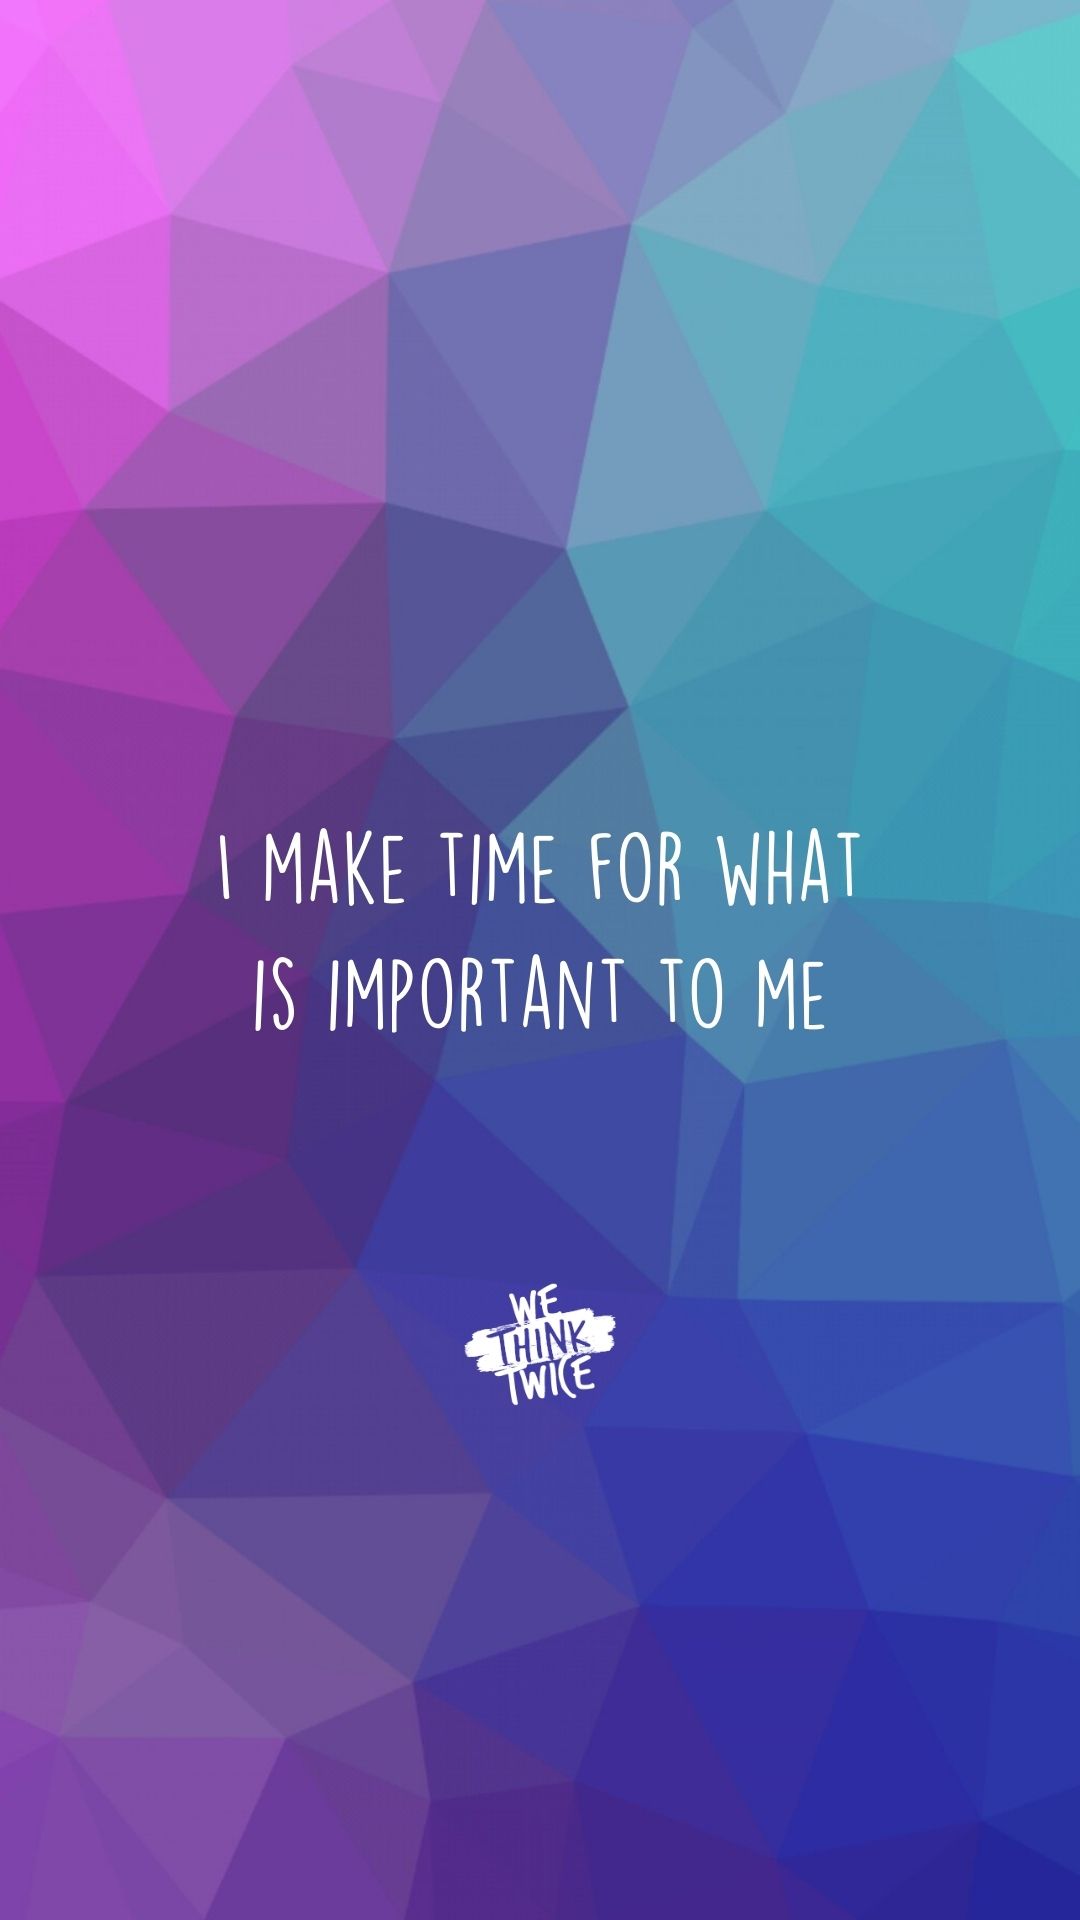 I make time for what is important to me